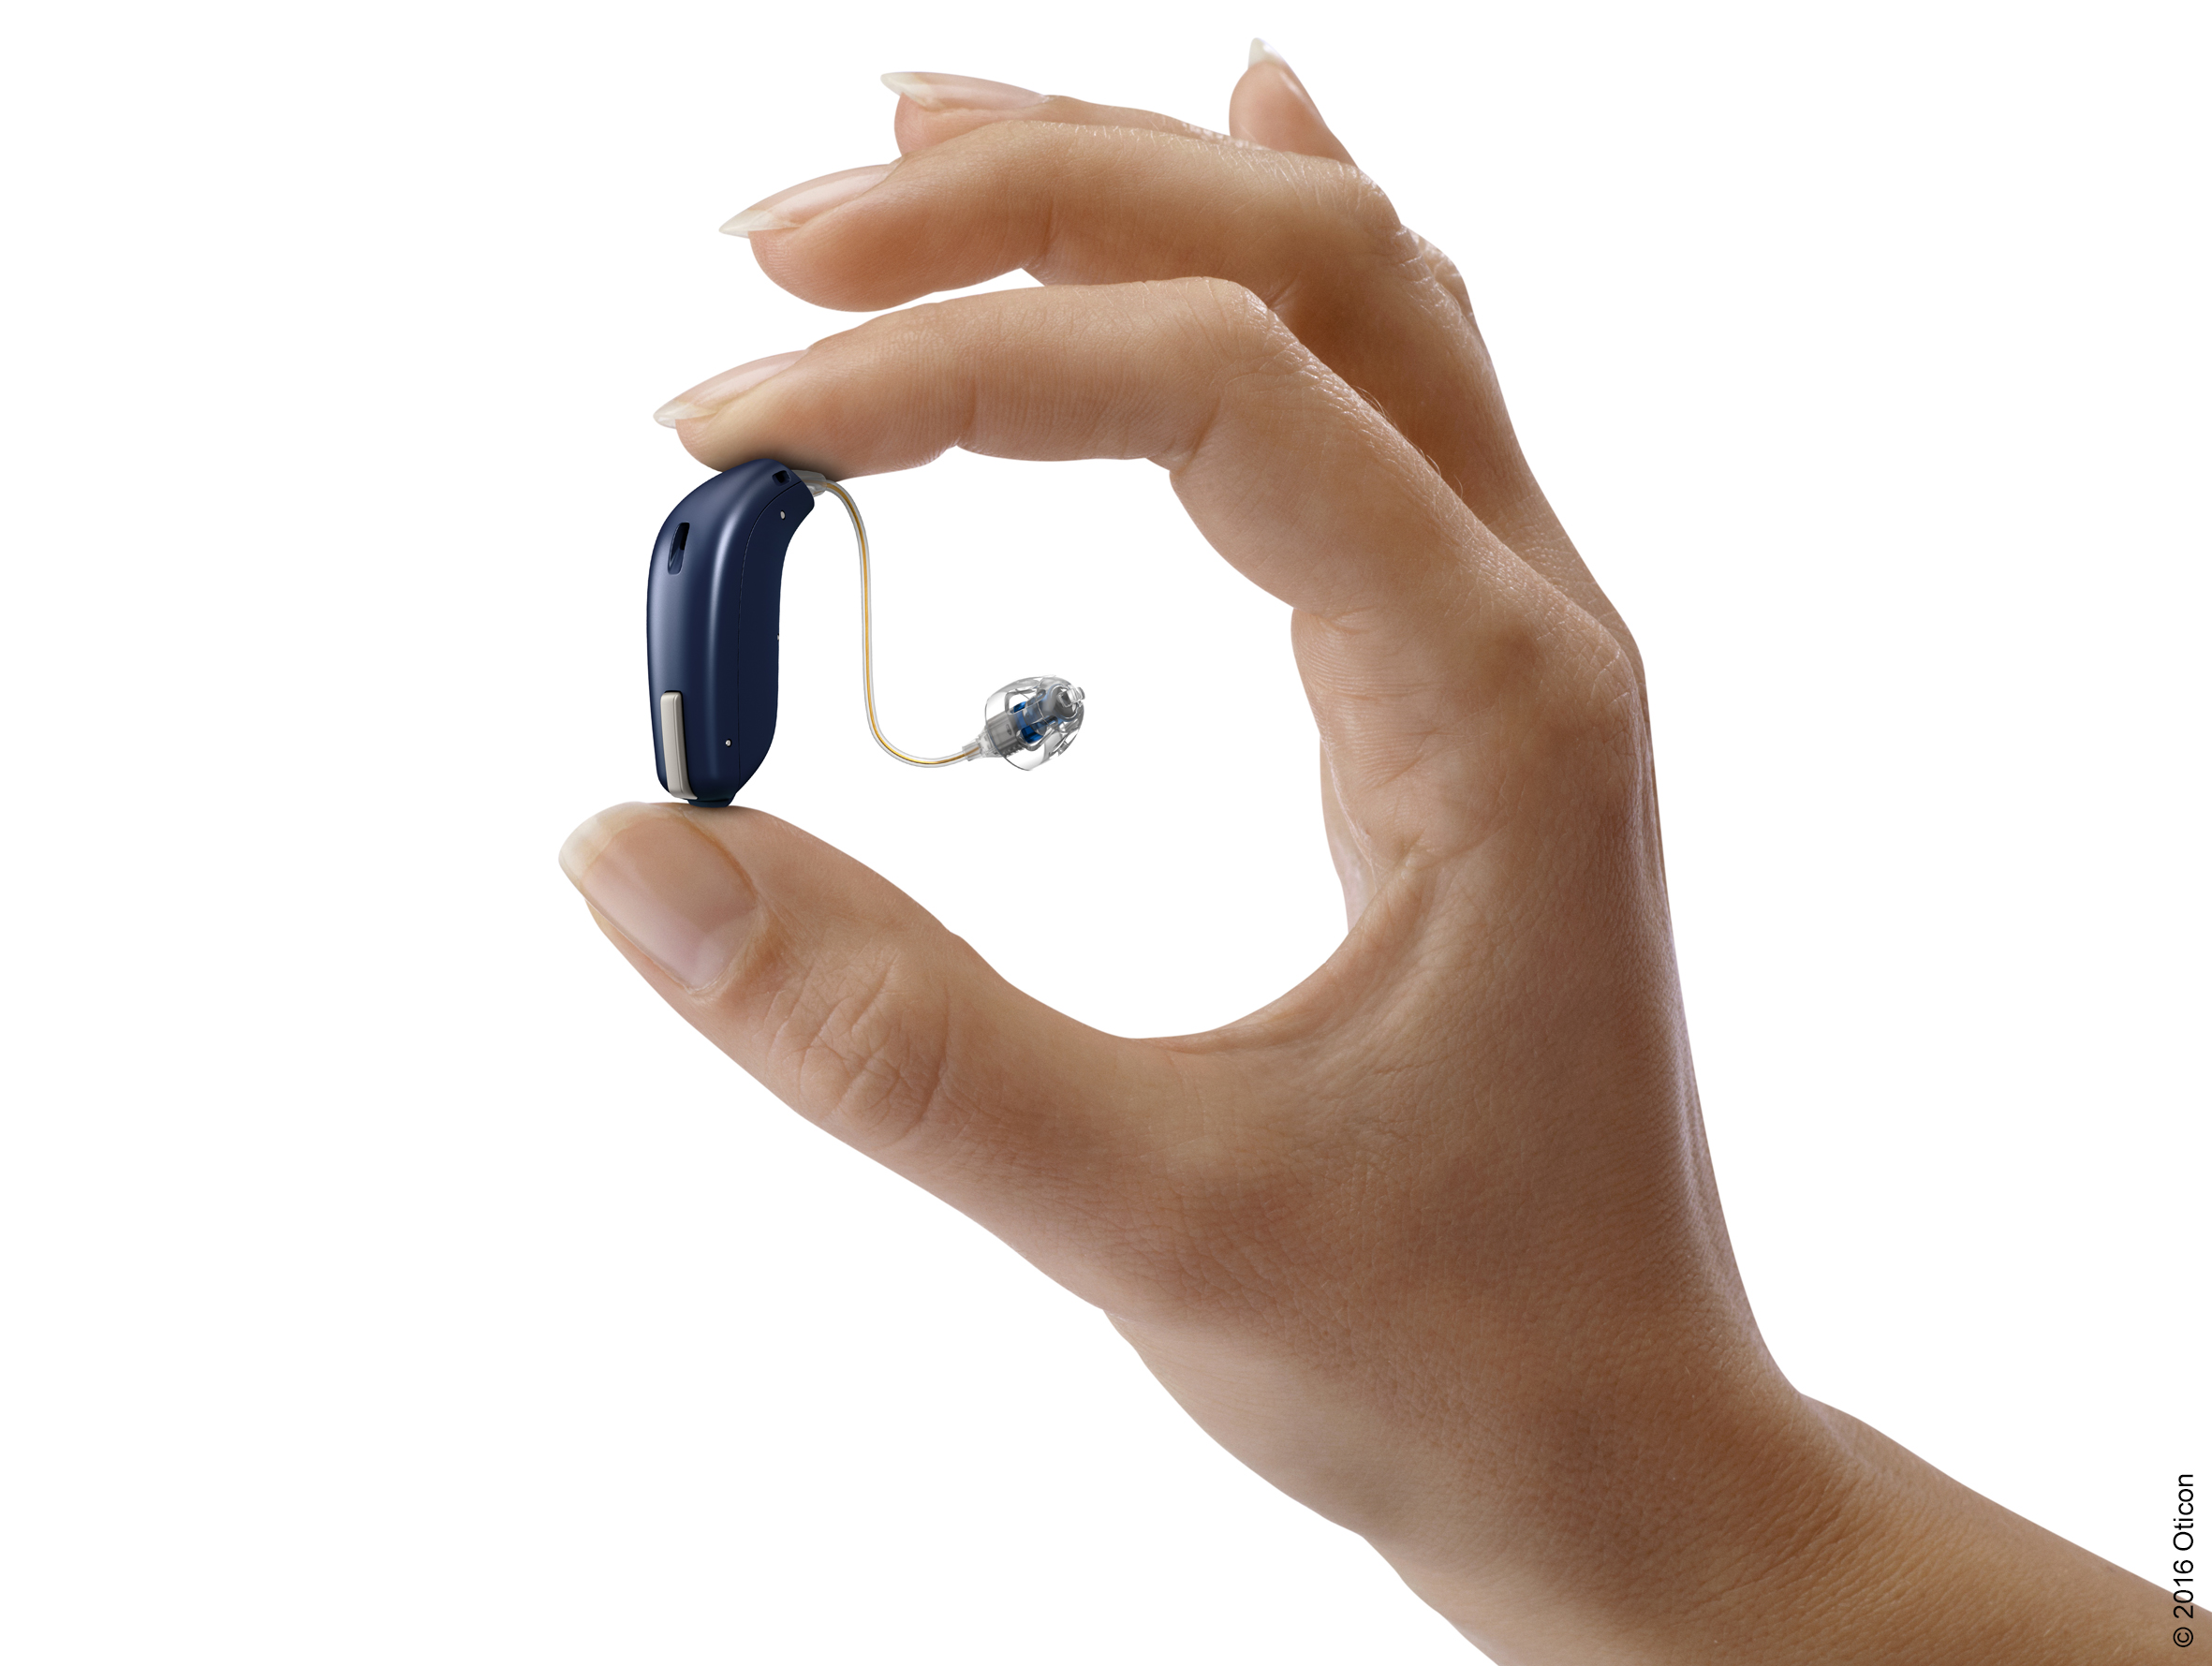 Hearing Aid Market Forecast 2021-2026 Industry Trends, Share, Size, Growth and Forecast - IMARC Group